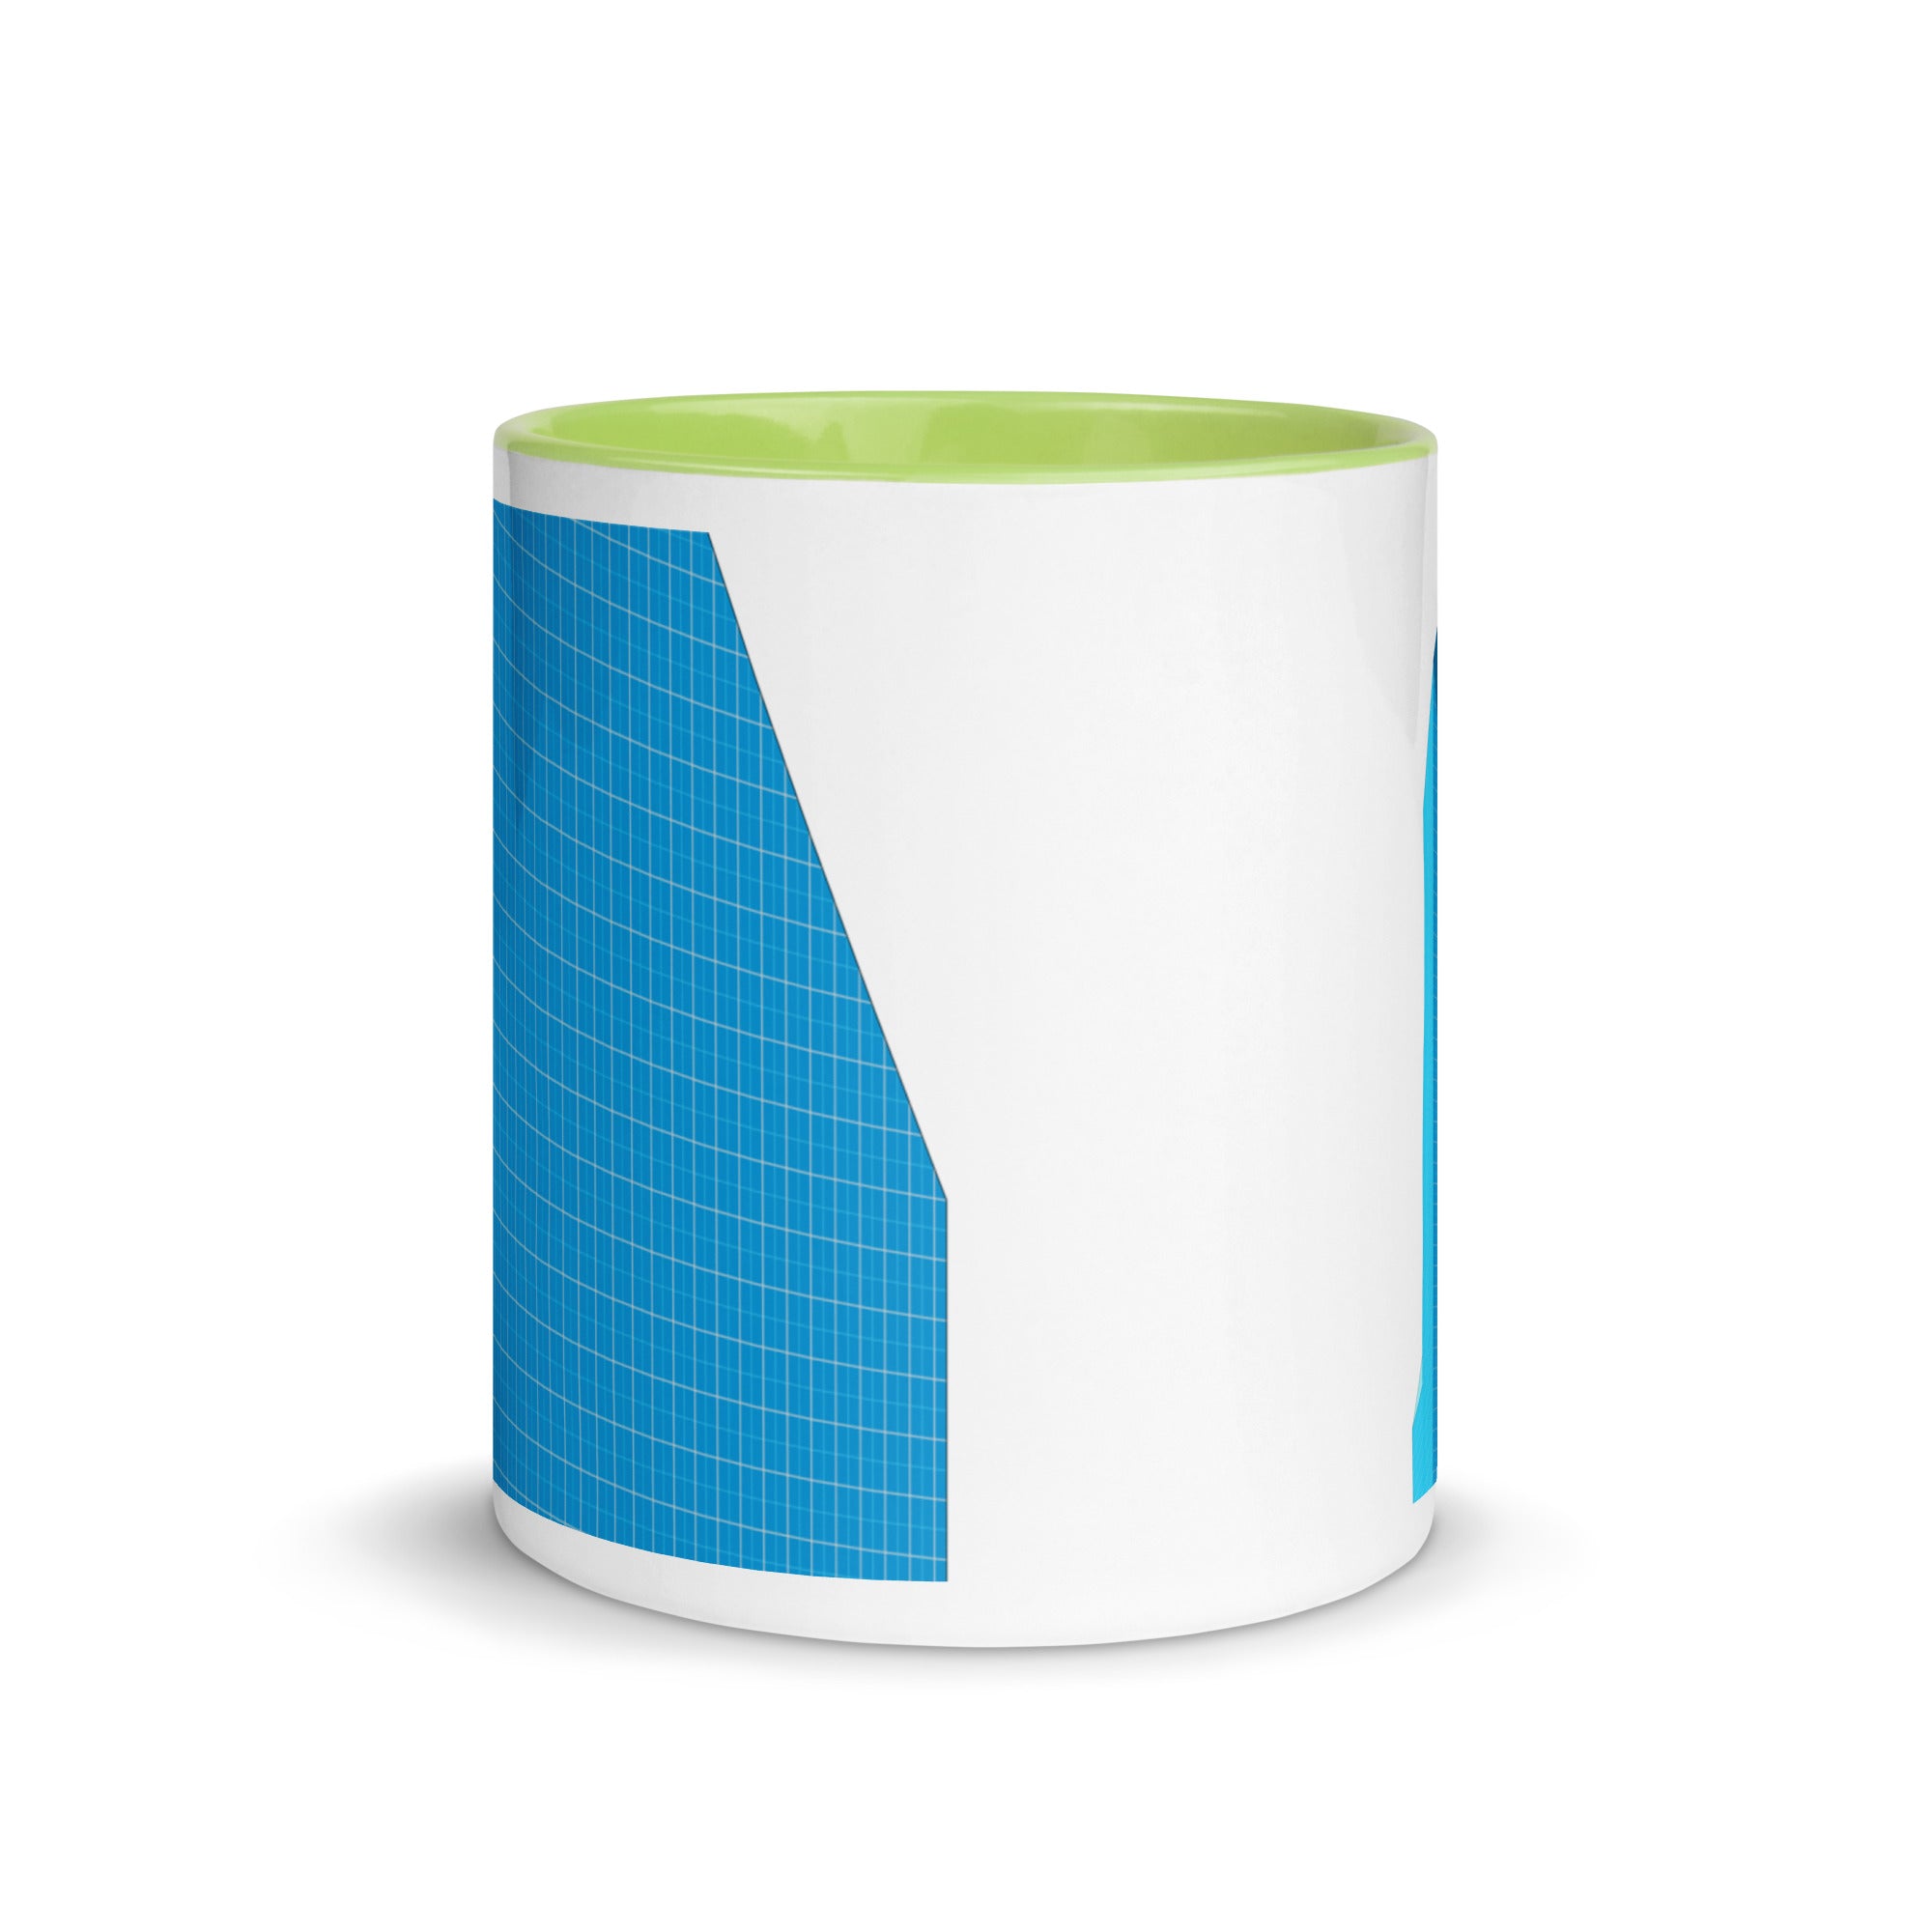 Fountain Place Mug with Colors Inside